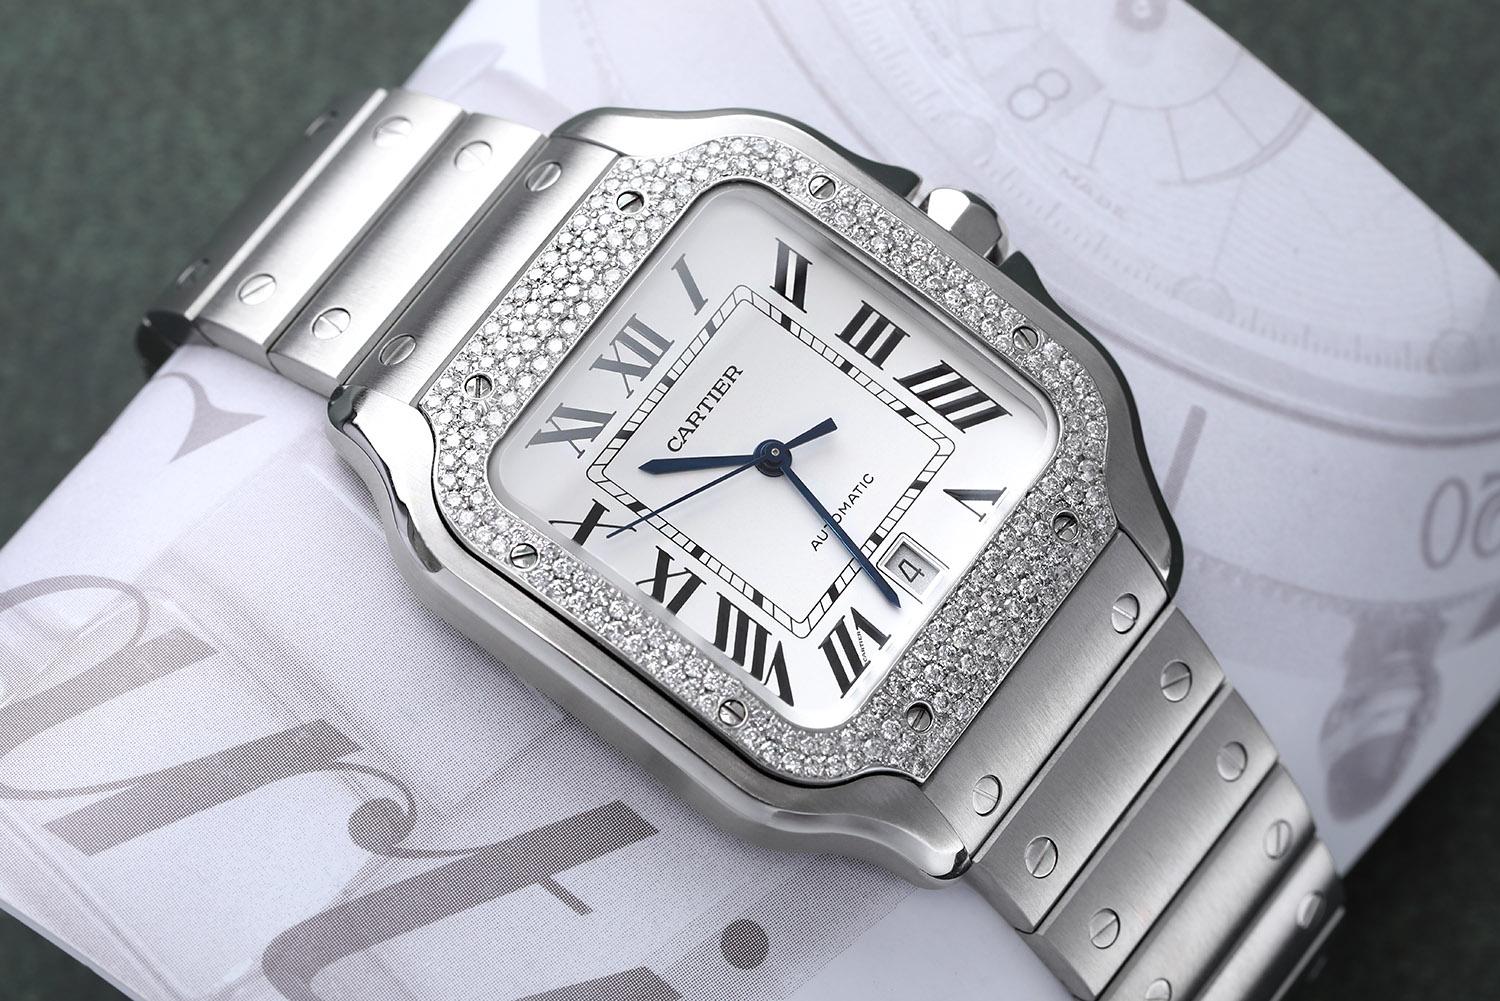 Cartier Santos Large Stainless Steel Watch with Custom Diamond Bezel Factory White Roman Numeral Dial
WATCH COMES WITH AN ADDITIONAL Light Brown LEATHER STRAP! Mechanical movement with automatic winding, caliber 1847 MC. Steel case, 7-sided crown